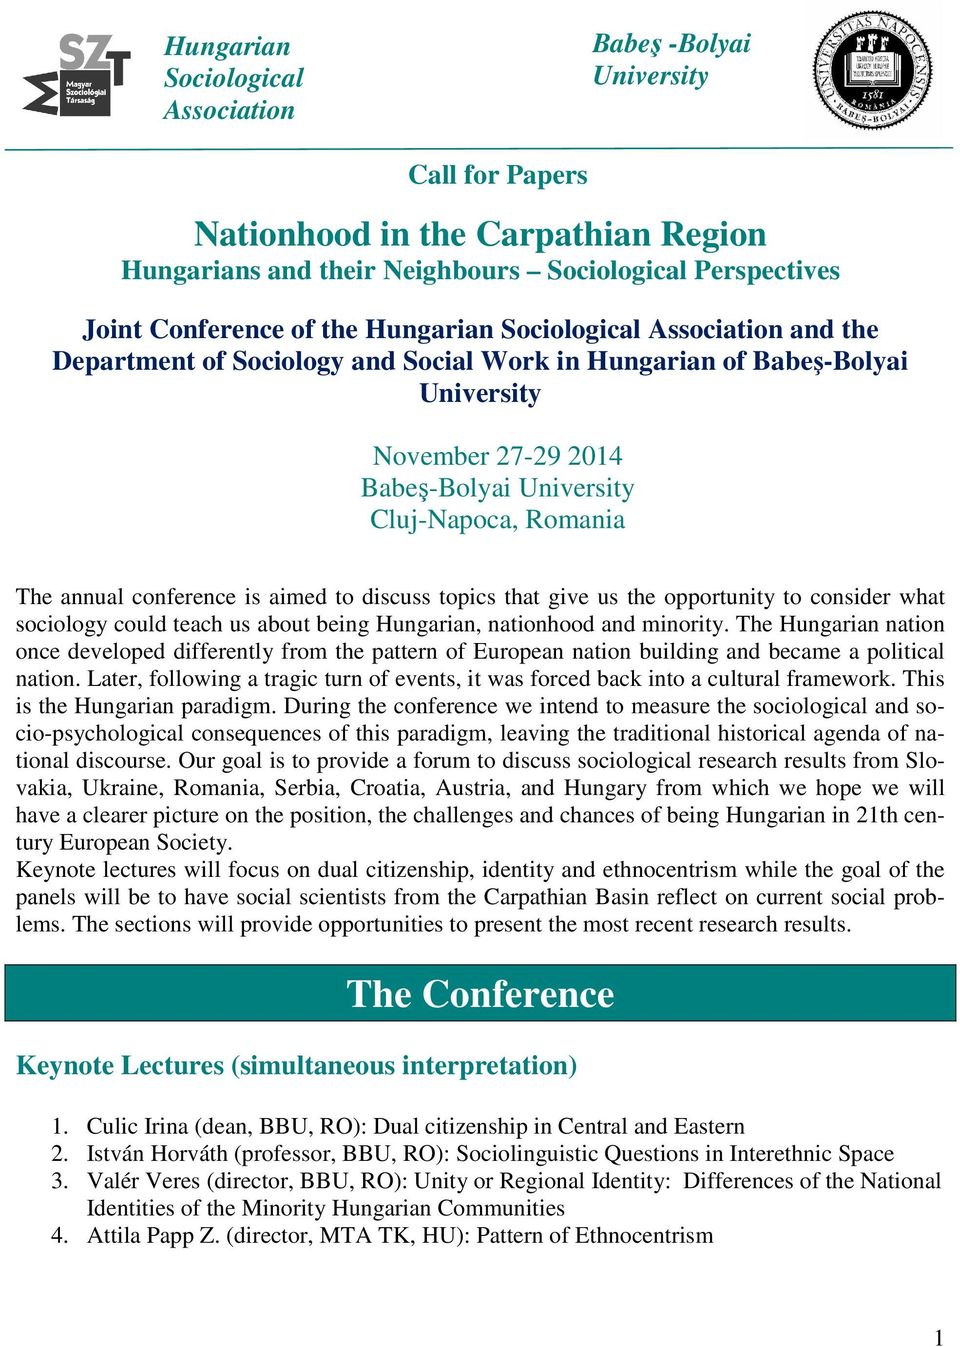 conference is aimed to discuss topics that give us the opportunity to consider what sociology could teach us about being Hungarian, nationhood and minority.